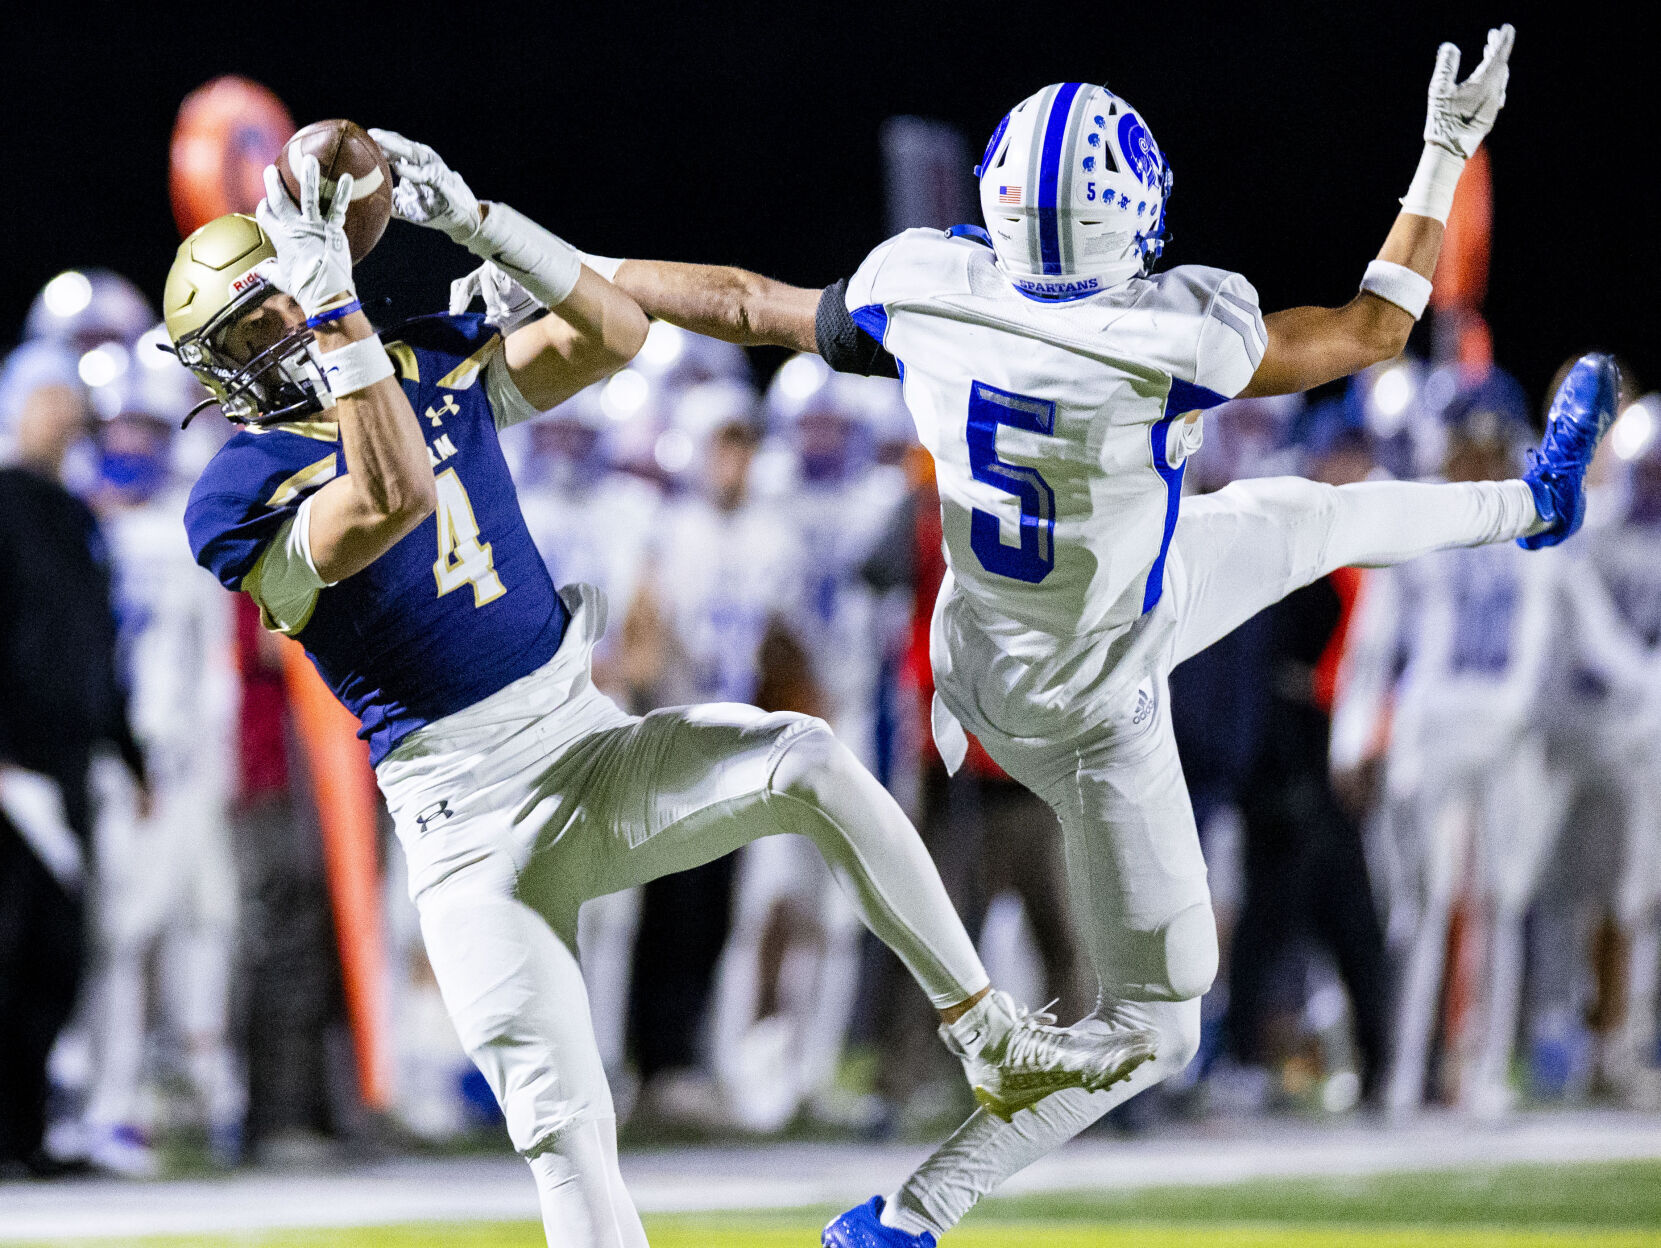 Elkhorn South Secures Victory Over Lincoln East in Class A State Quarterfinals